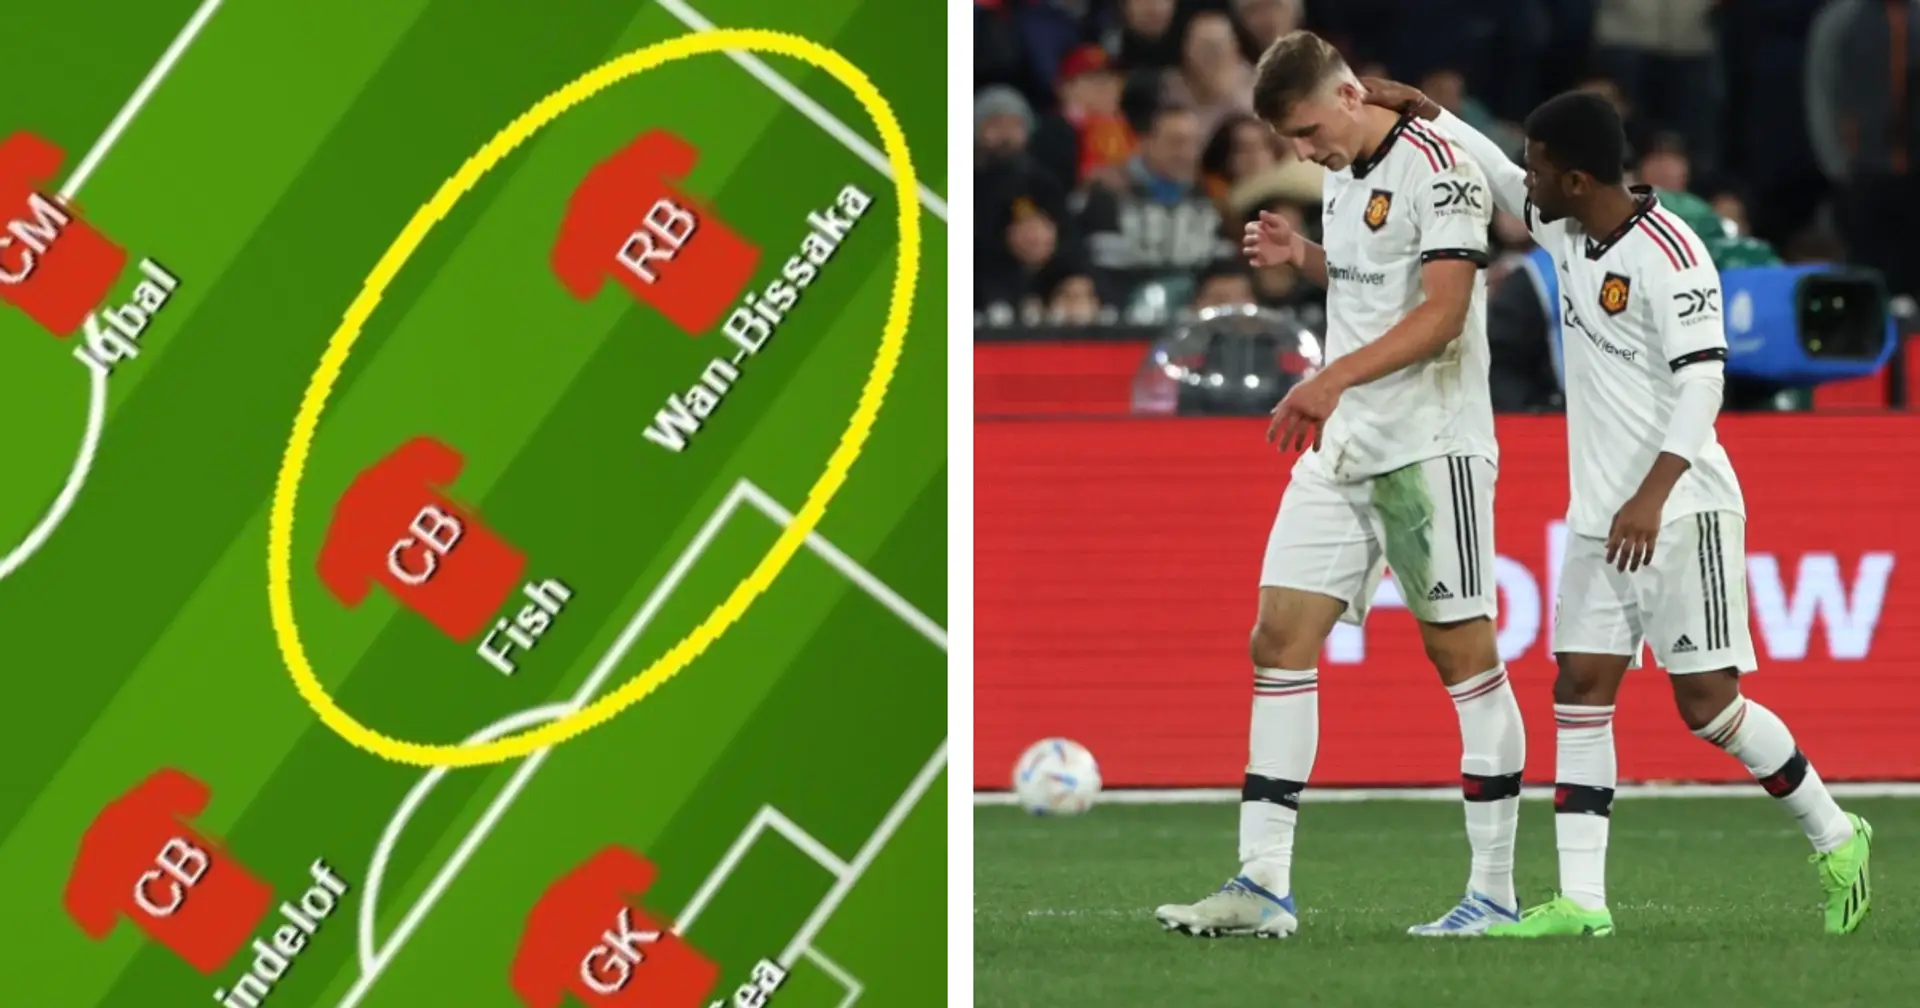 Man United's biggest weakness in Crystal Palace win shown in lineup